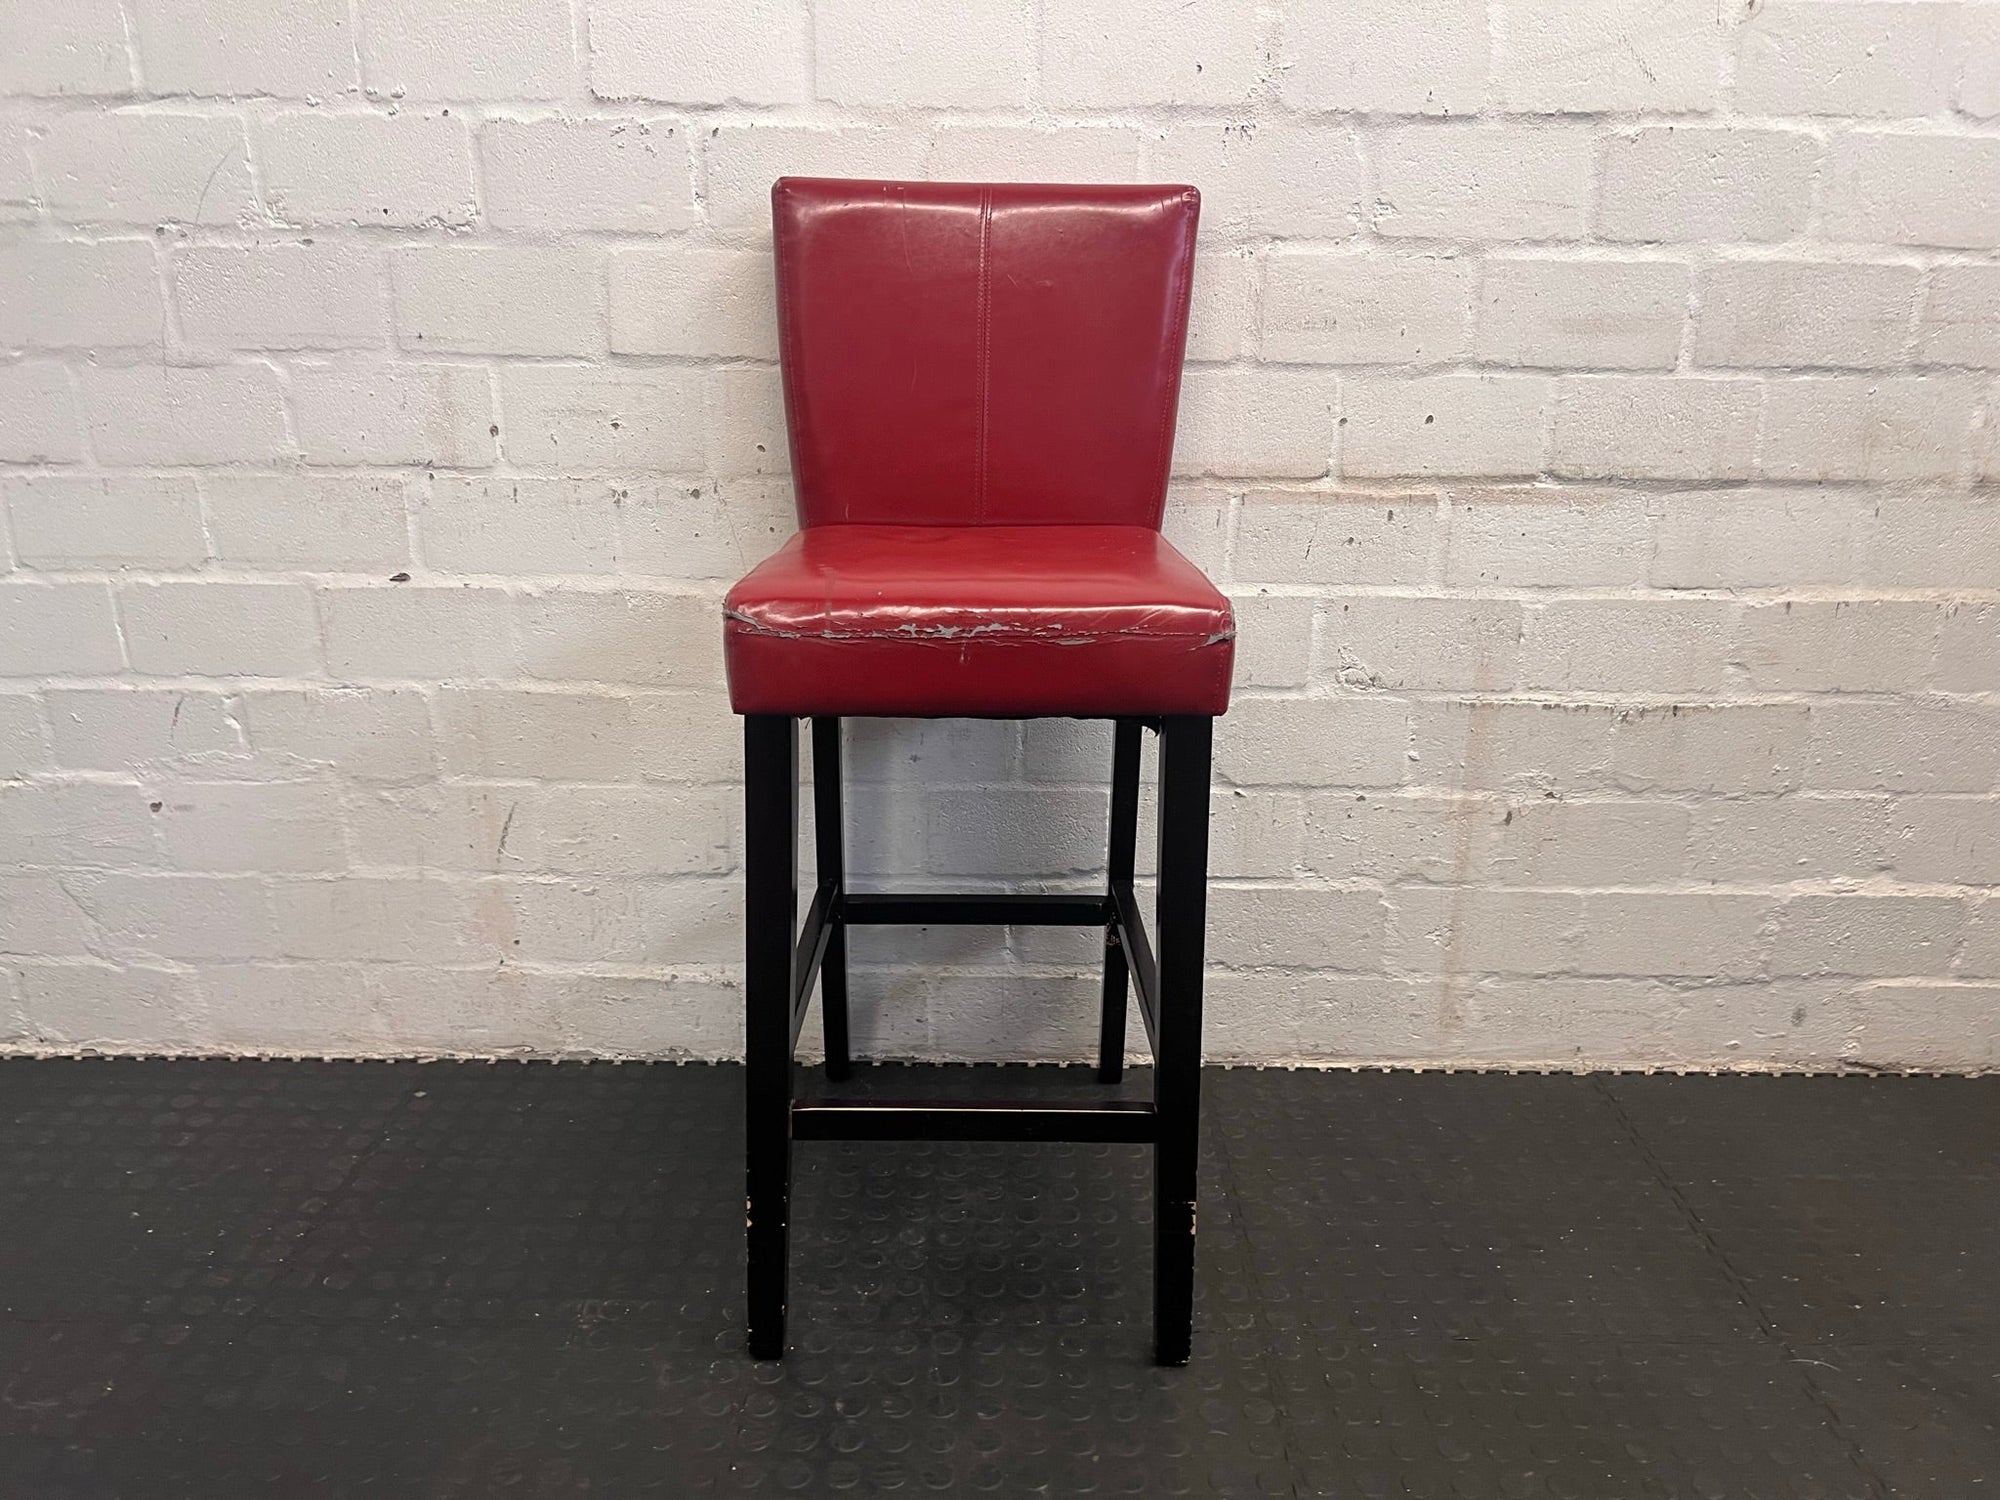 Red Faux Leather Bar Stool with Wooden Legs (Slight Damage to Leather)